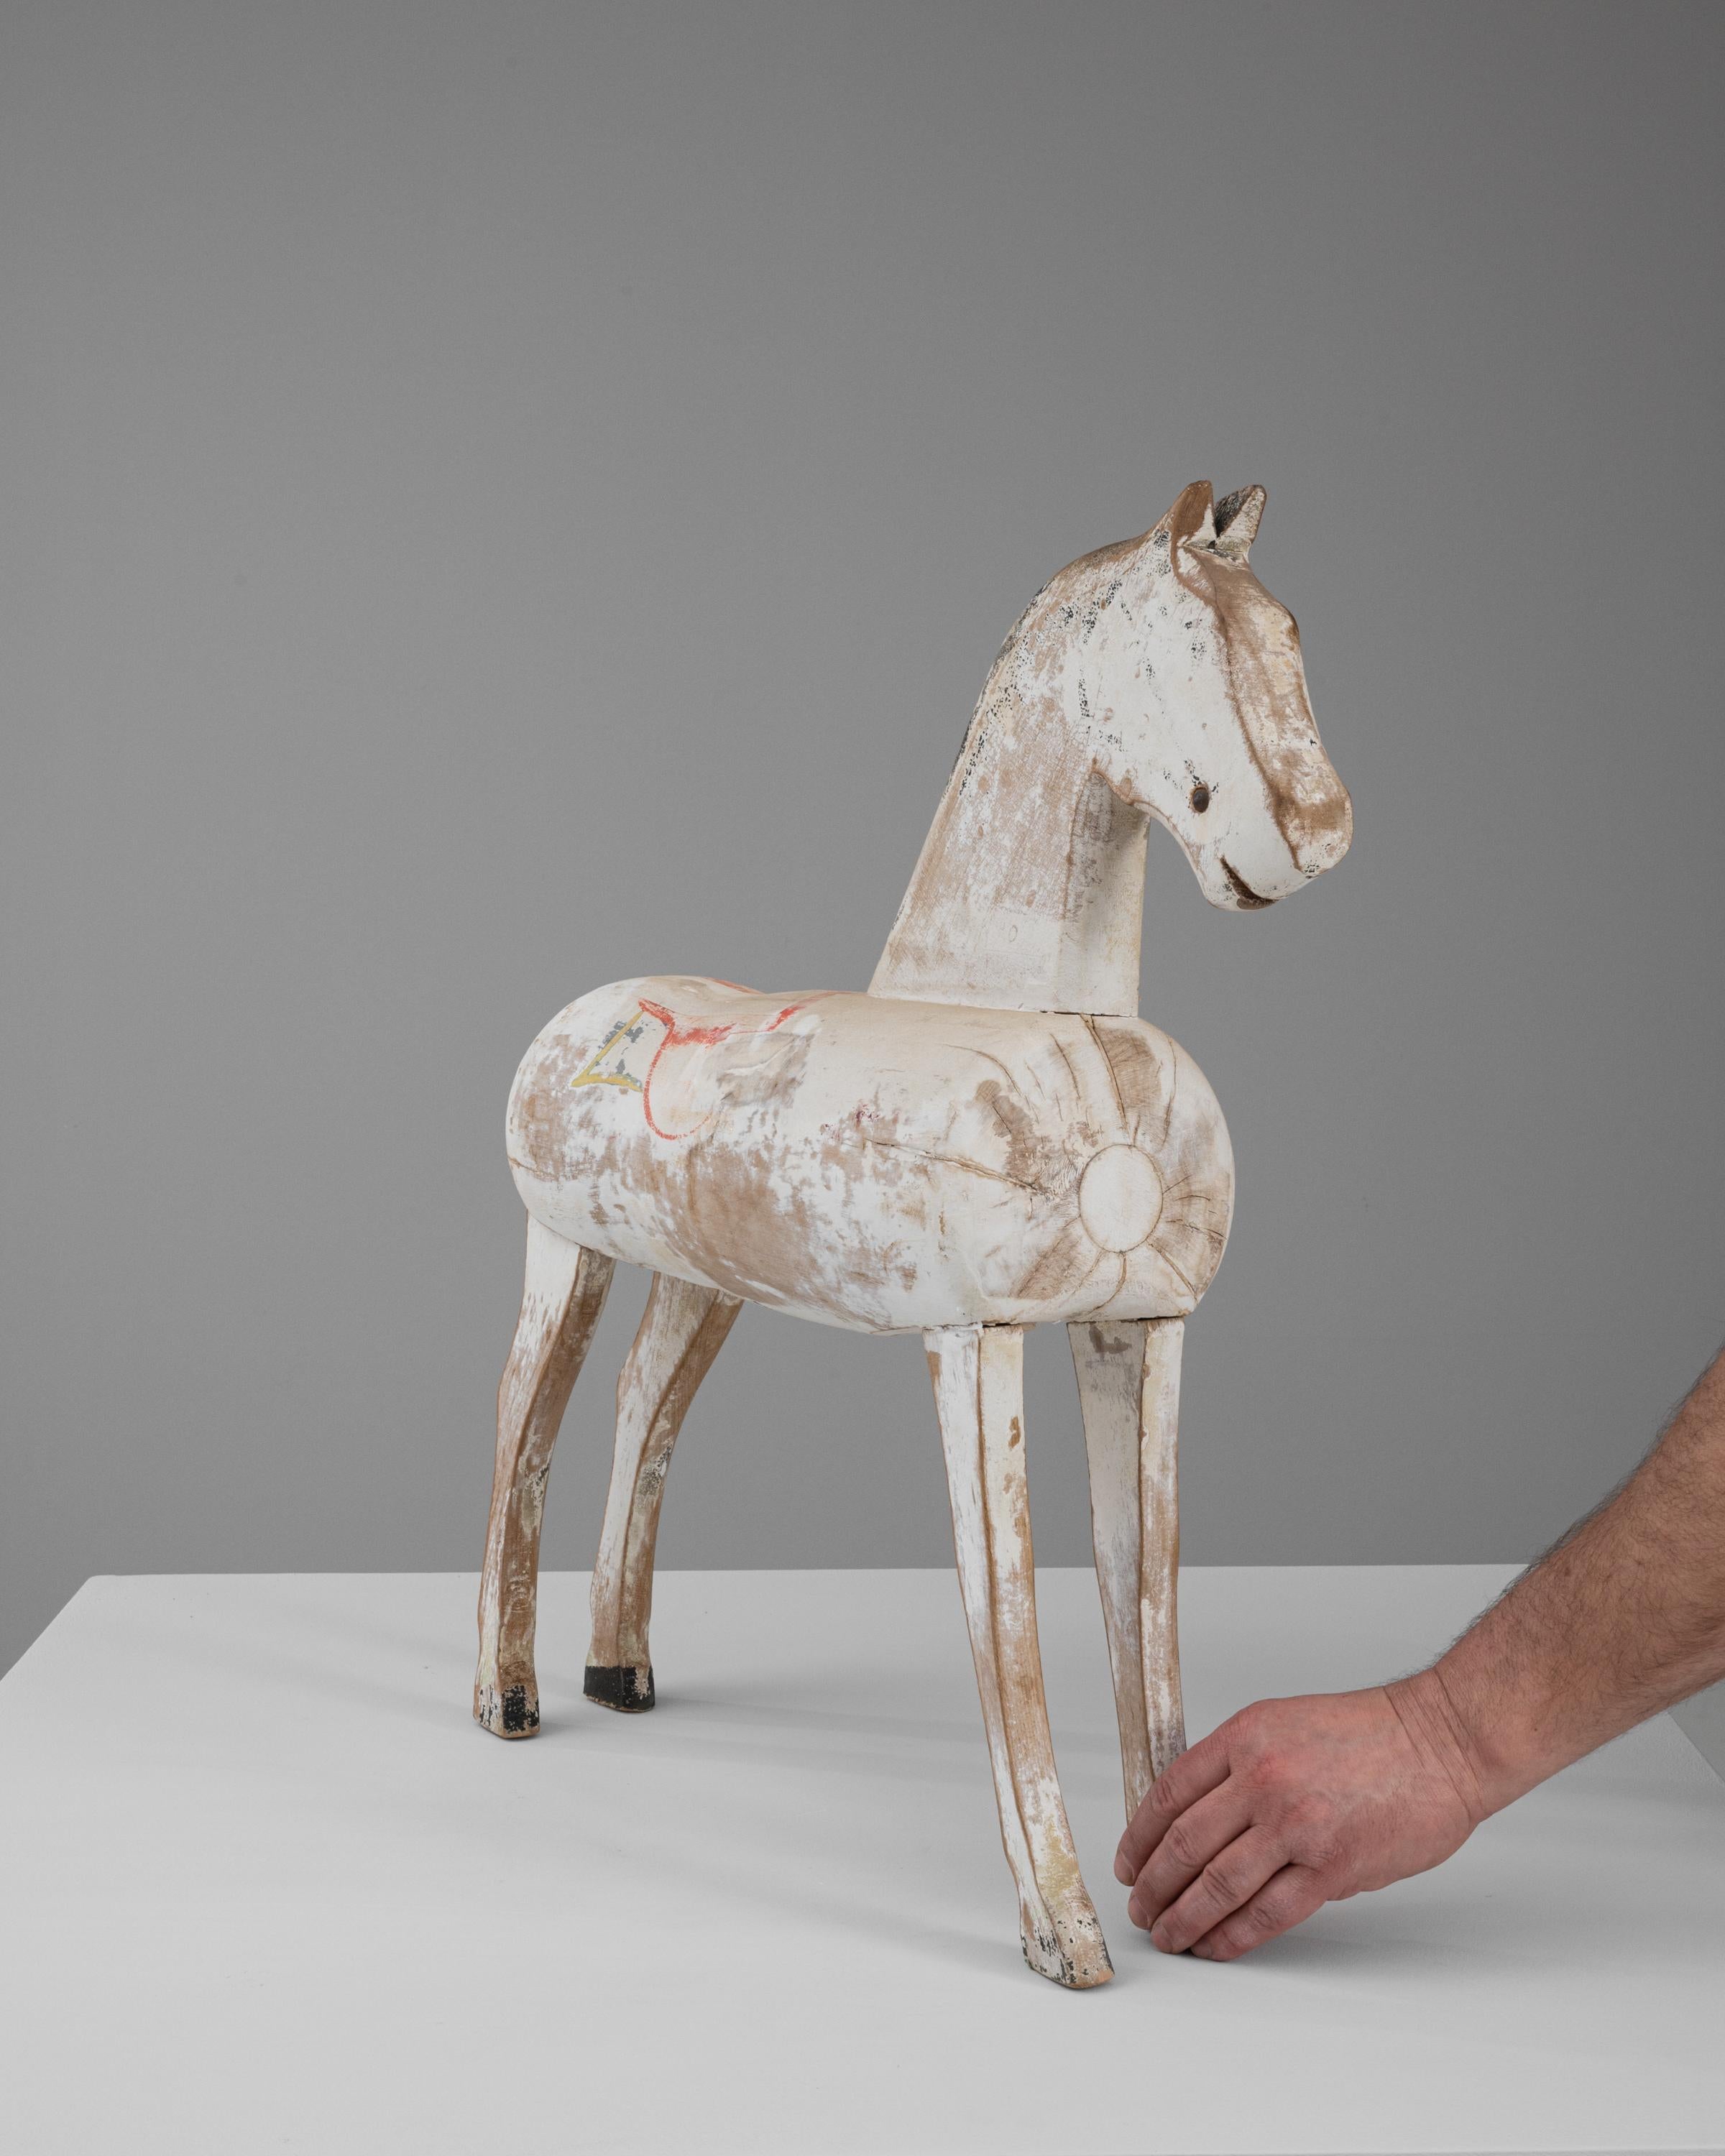 This 1900s French Wooden Horse is a splendid example of vintage craftsmanship and enduring folk art. With its weathered white paint and delicate remnants of original color detailing, particularly the subtle red and yellow markings, this piece